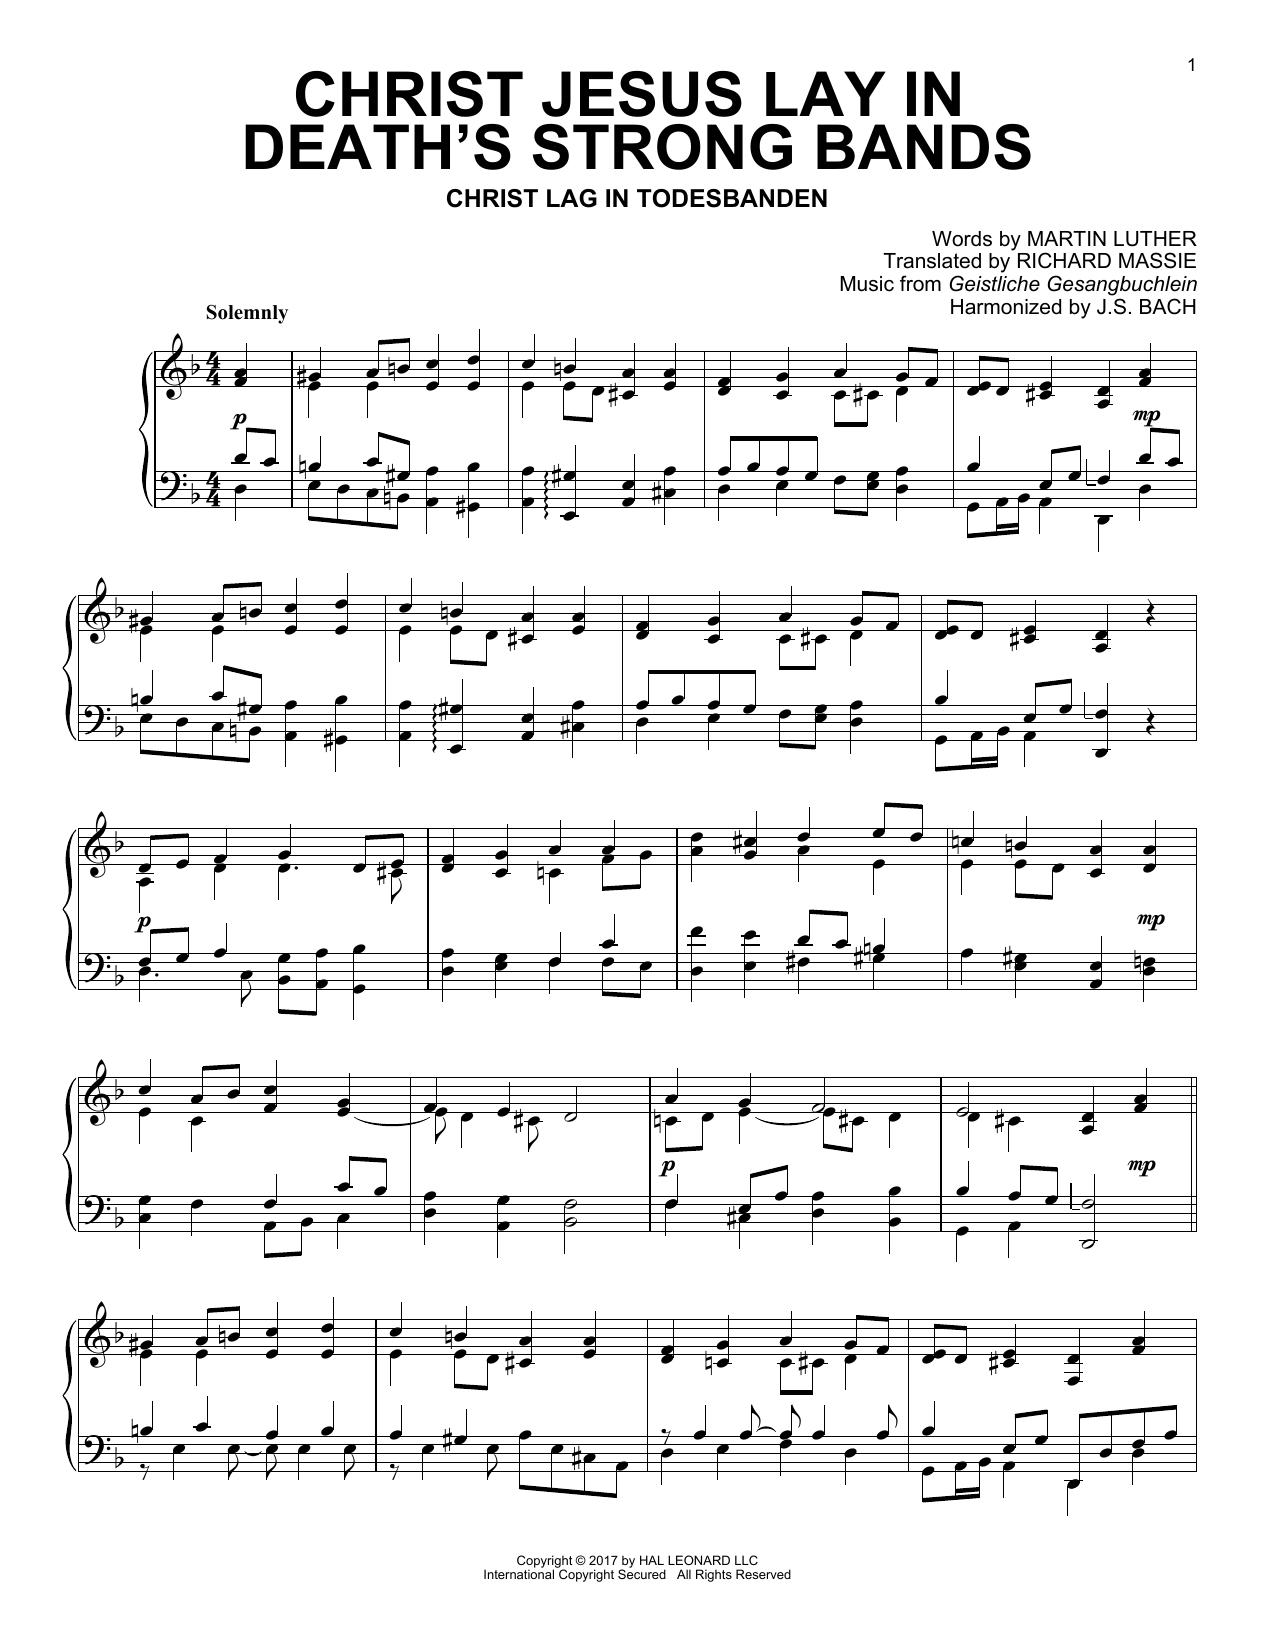 Geistliche Gesangbuchlein Christ Jesus Lay In Death's Strong Bands sheet music notes and chords. Download Printable PDF.